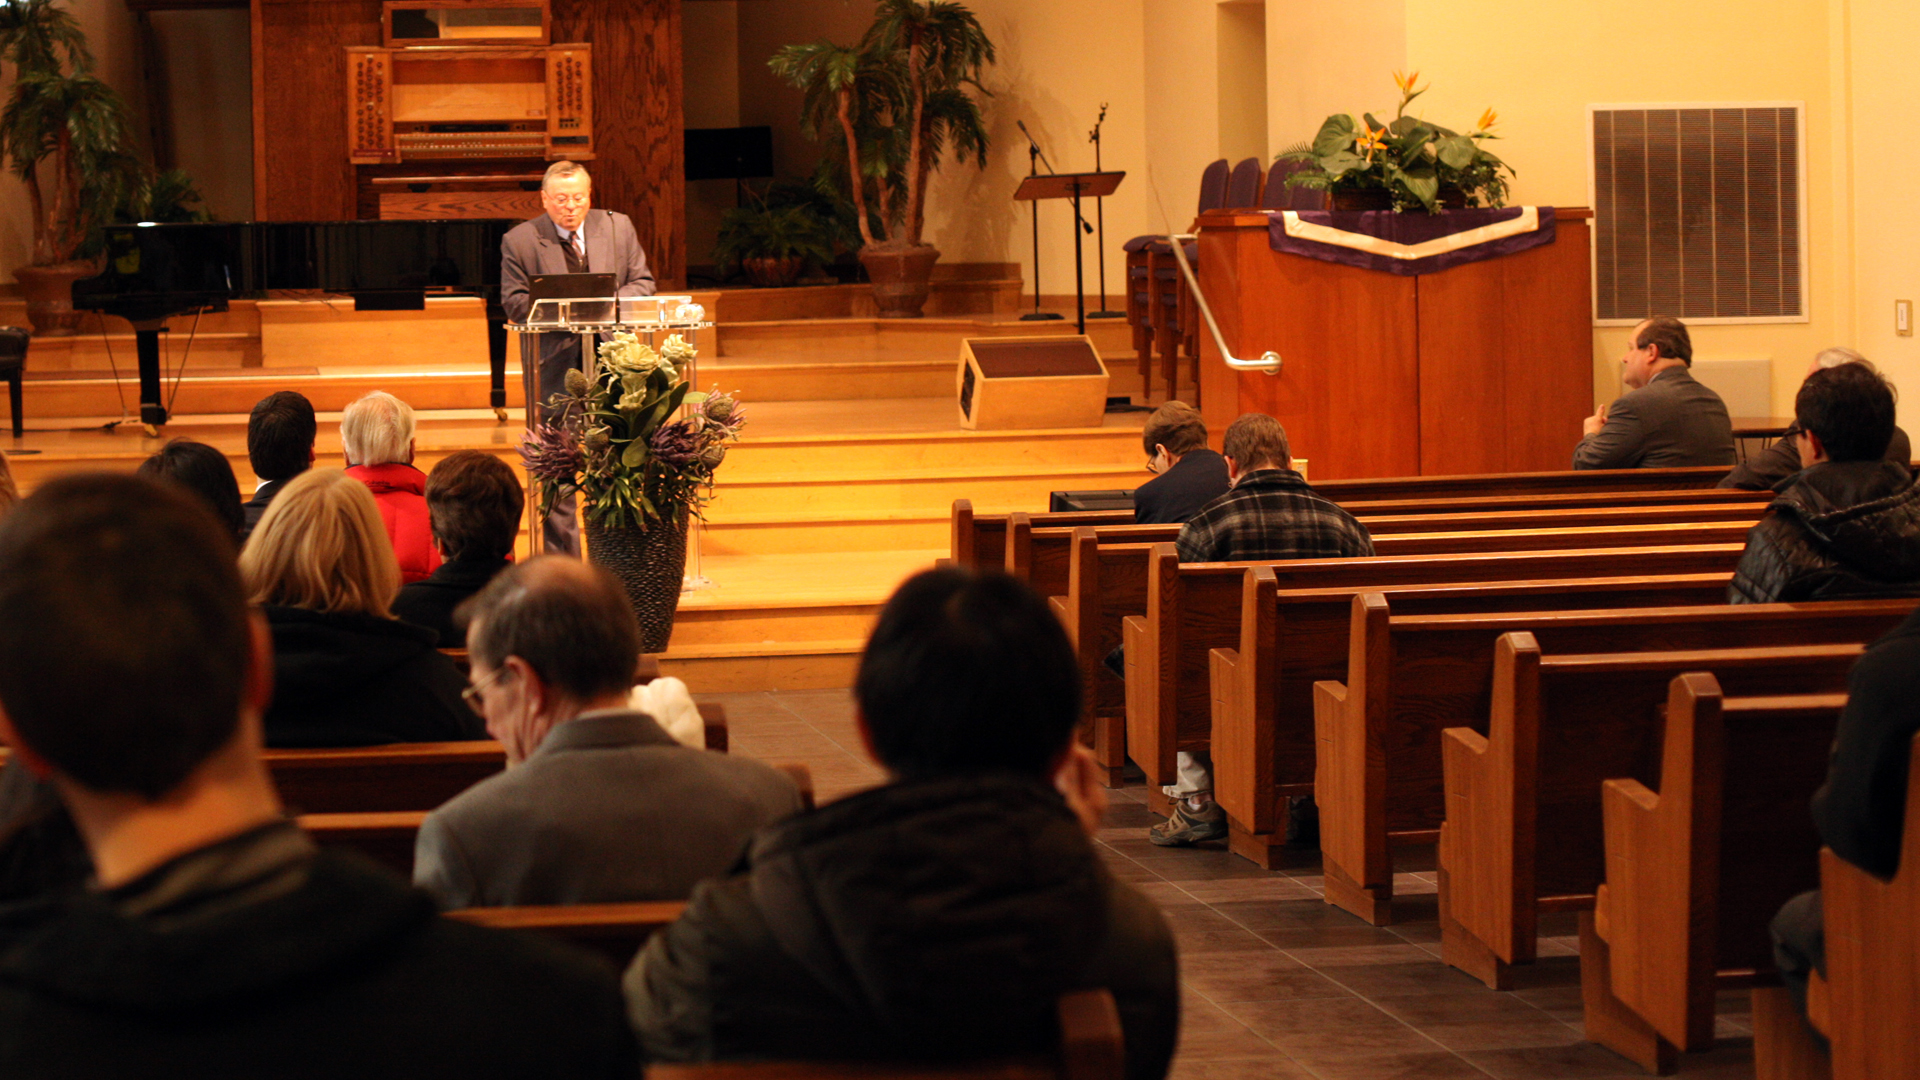 Ben Shoun giving the devotional talk at the Ellen White Issues Symposium on March 25, 2013.